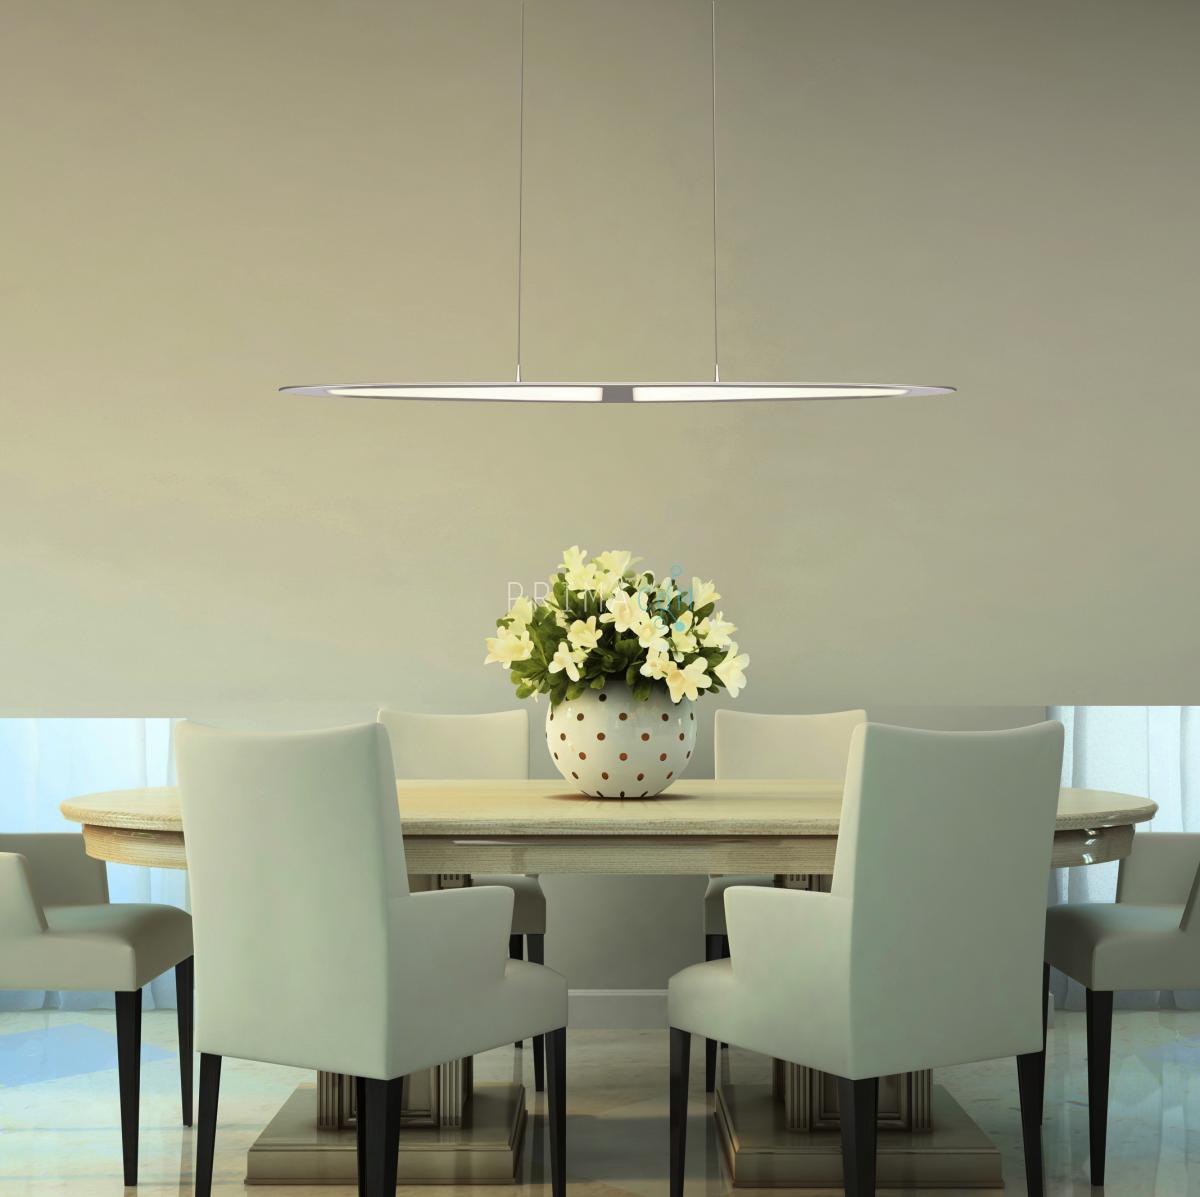 Adotled Pendant Lamp Silver, 28W, Size: 900x70x6mm. 1820lm, 2700K. KEDH030S1000R08A 1000 mA